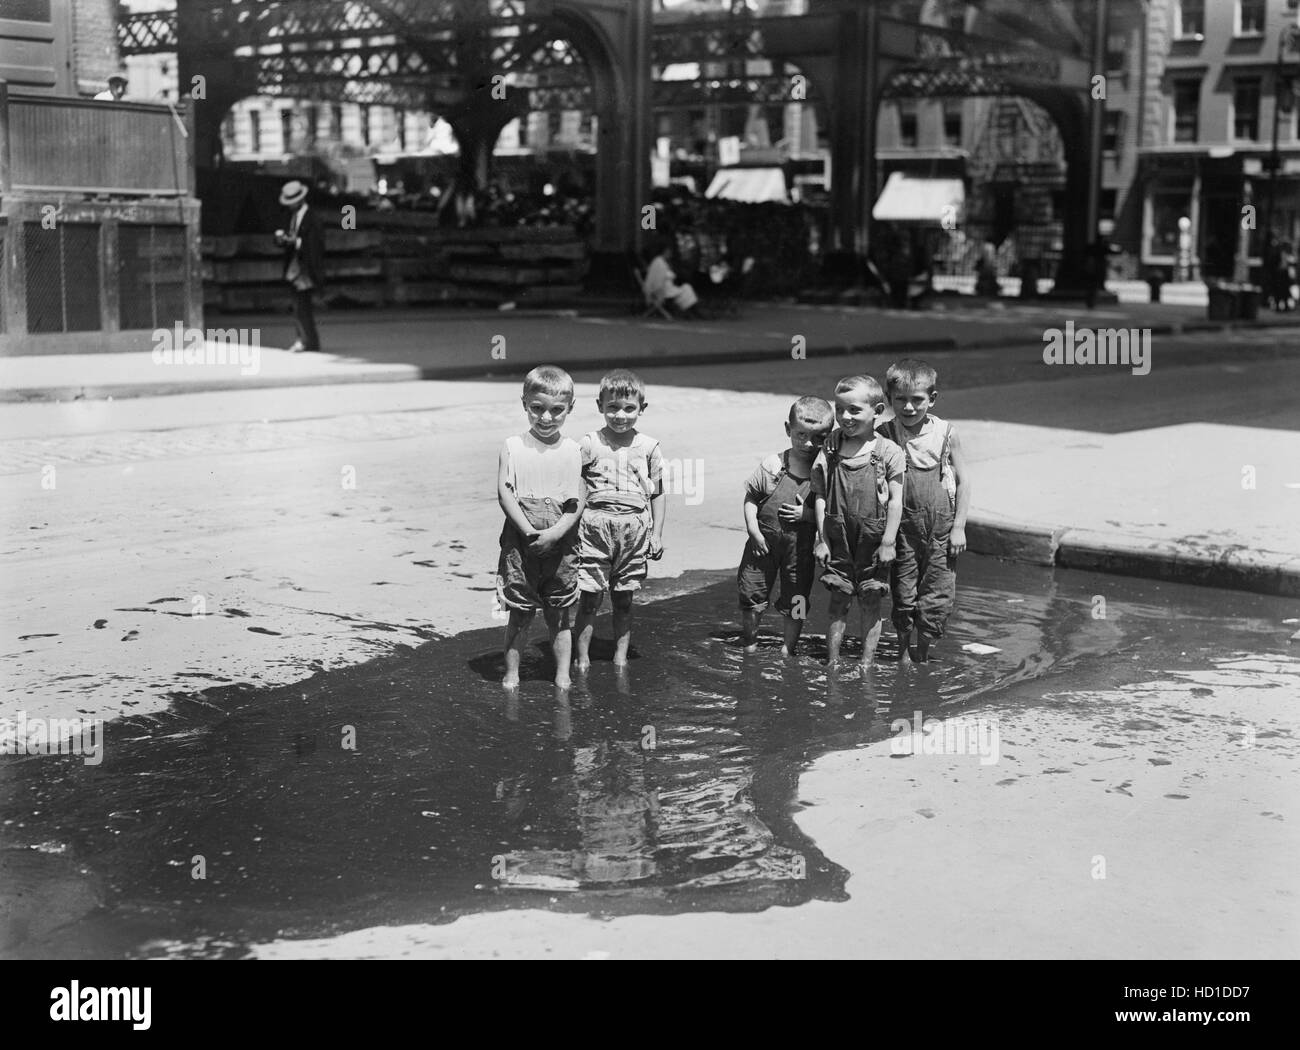 Group of Small Boys Standing in Street Puddle, New York City, New York, USA, Bain News Service, July 1913 Stock Photo